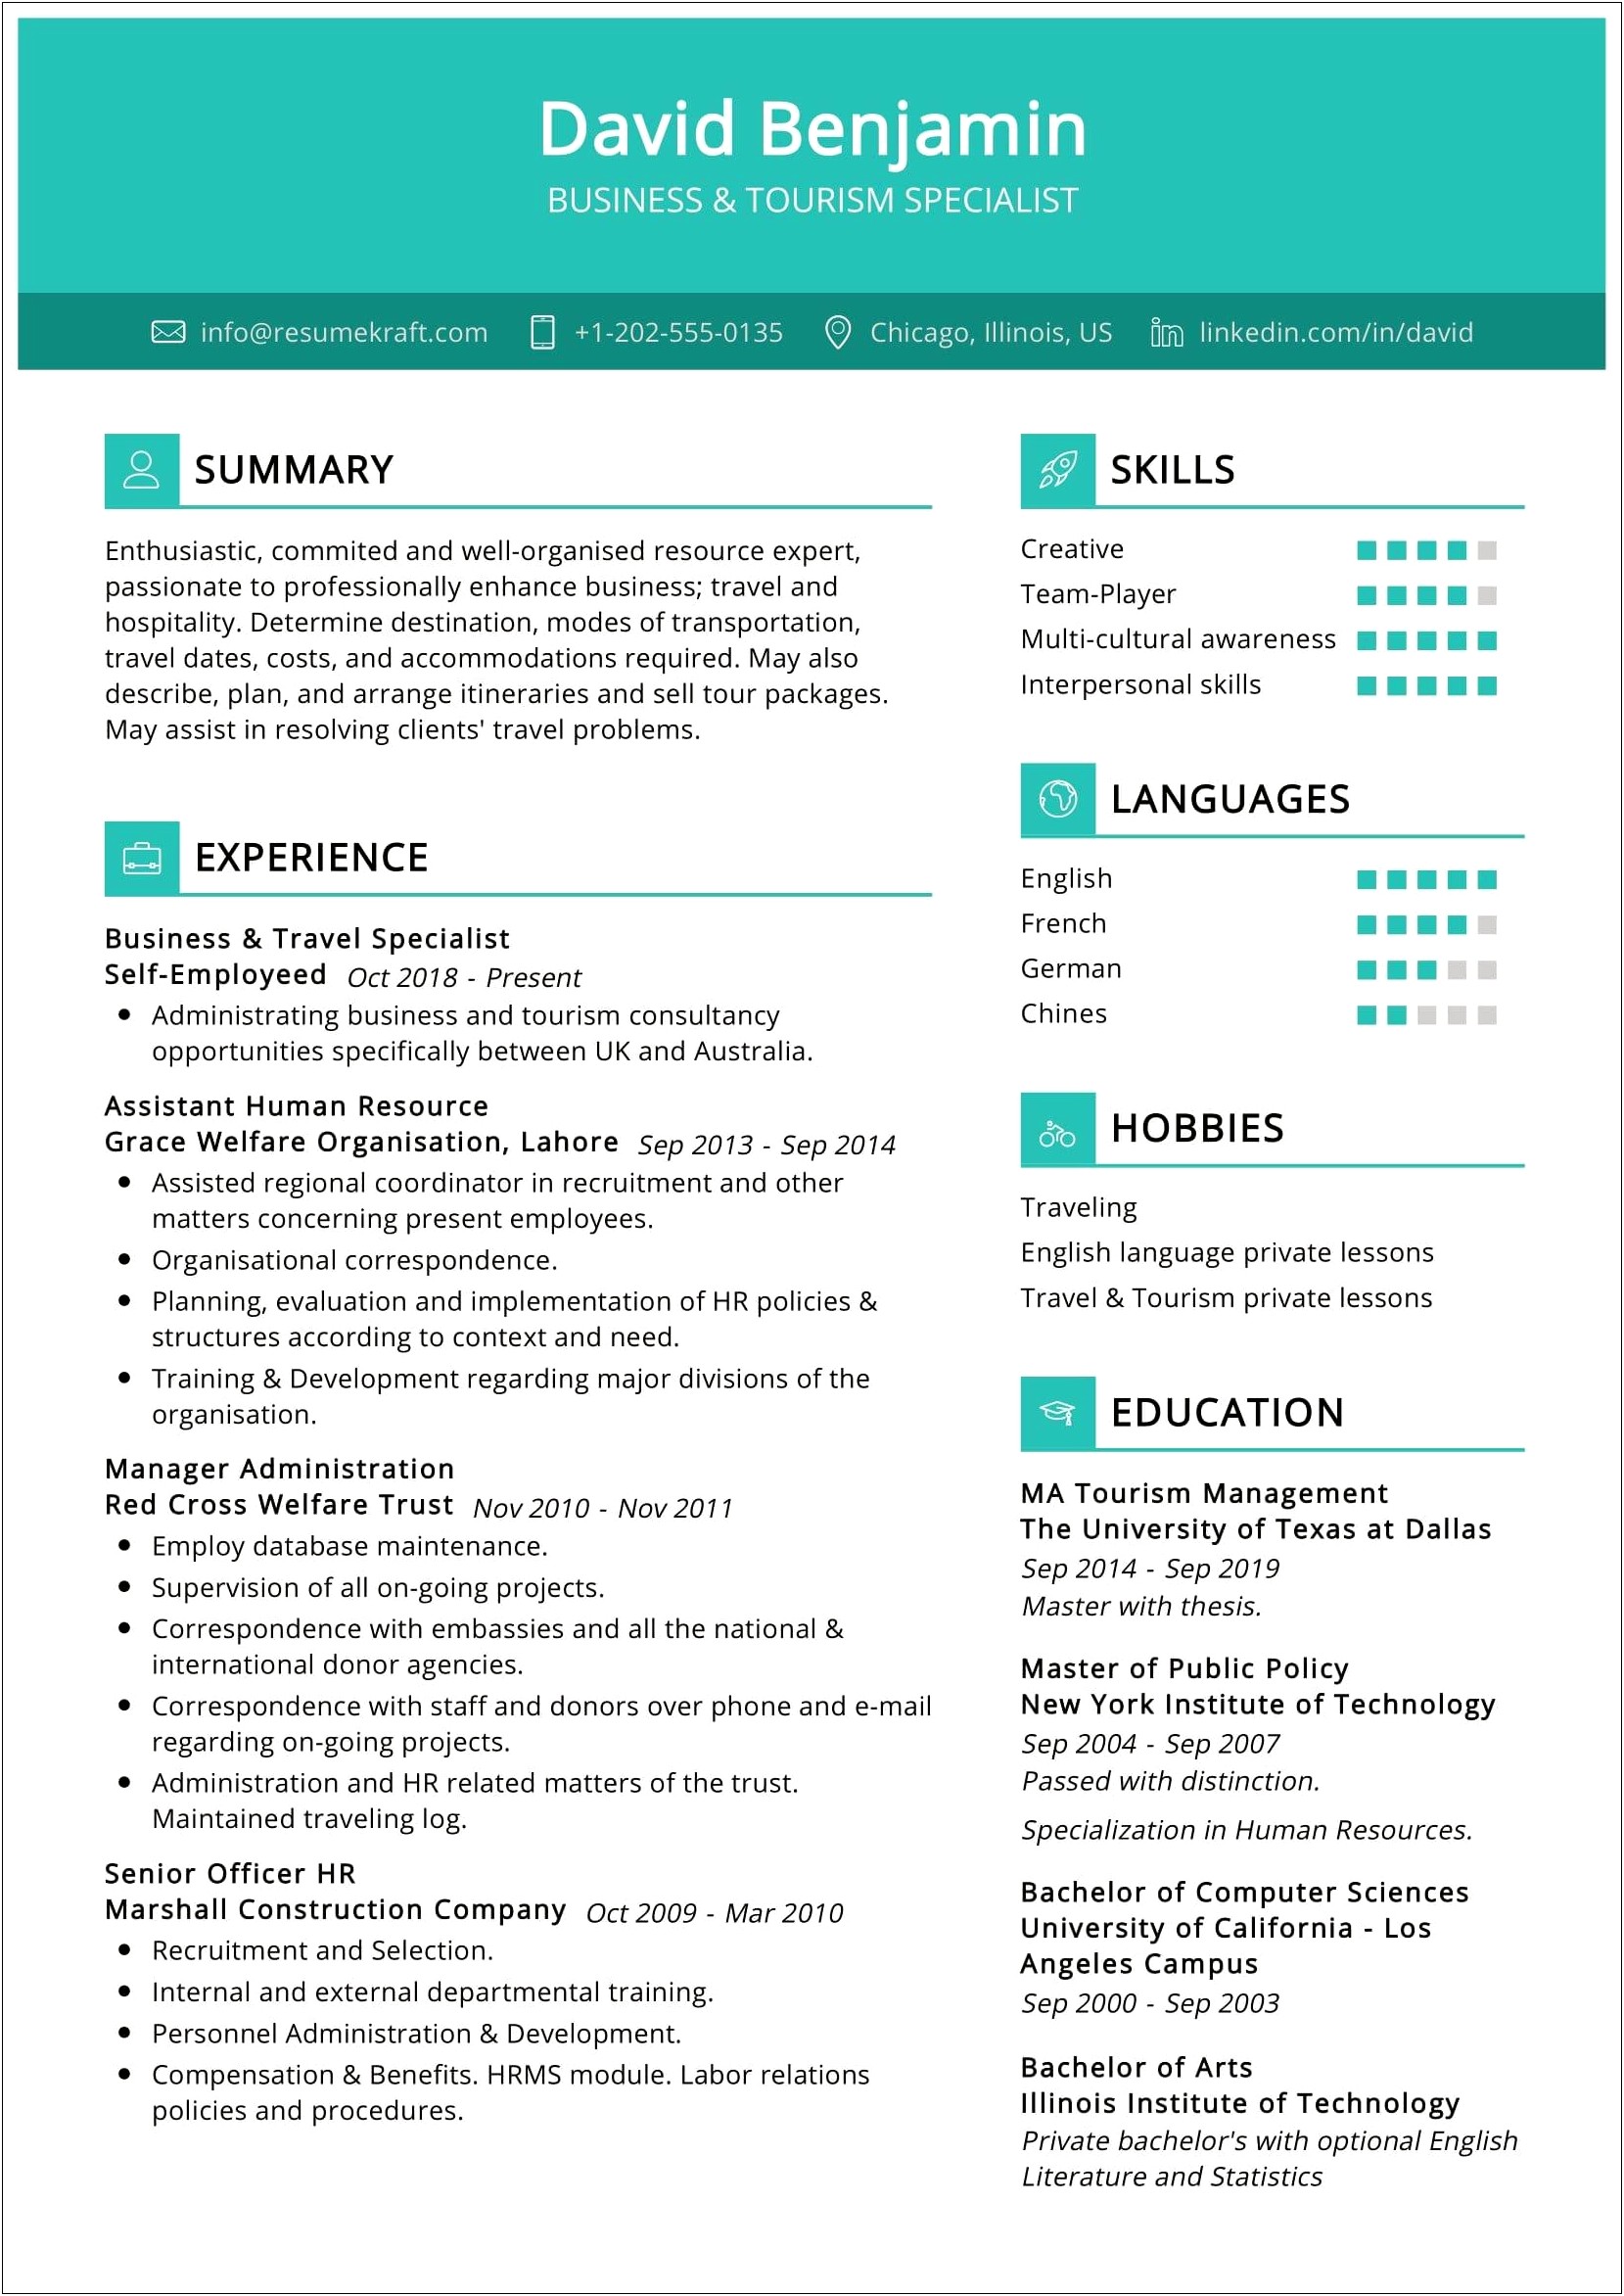 Find A Job Resume Looking For Travel Agency